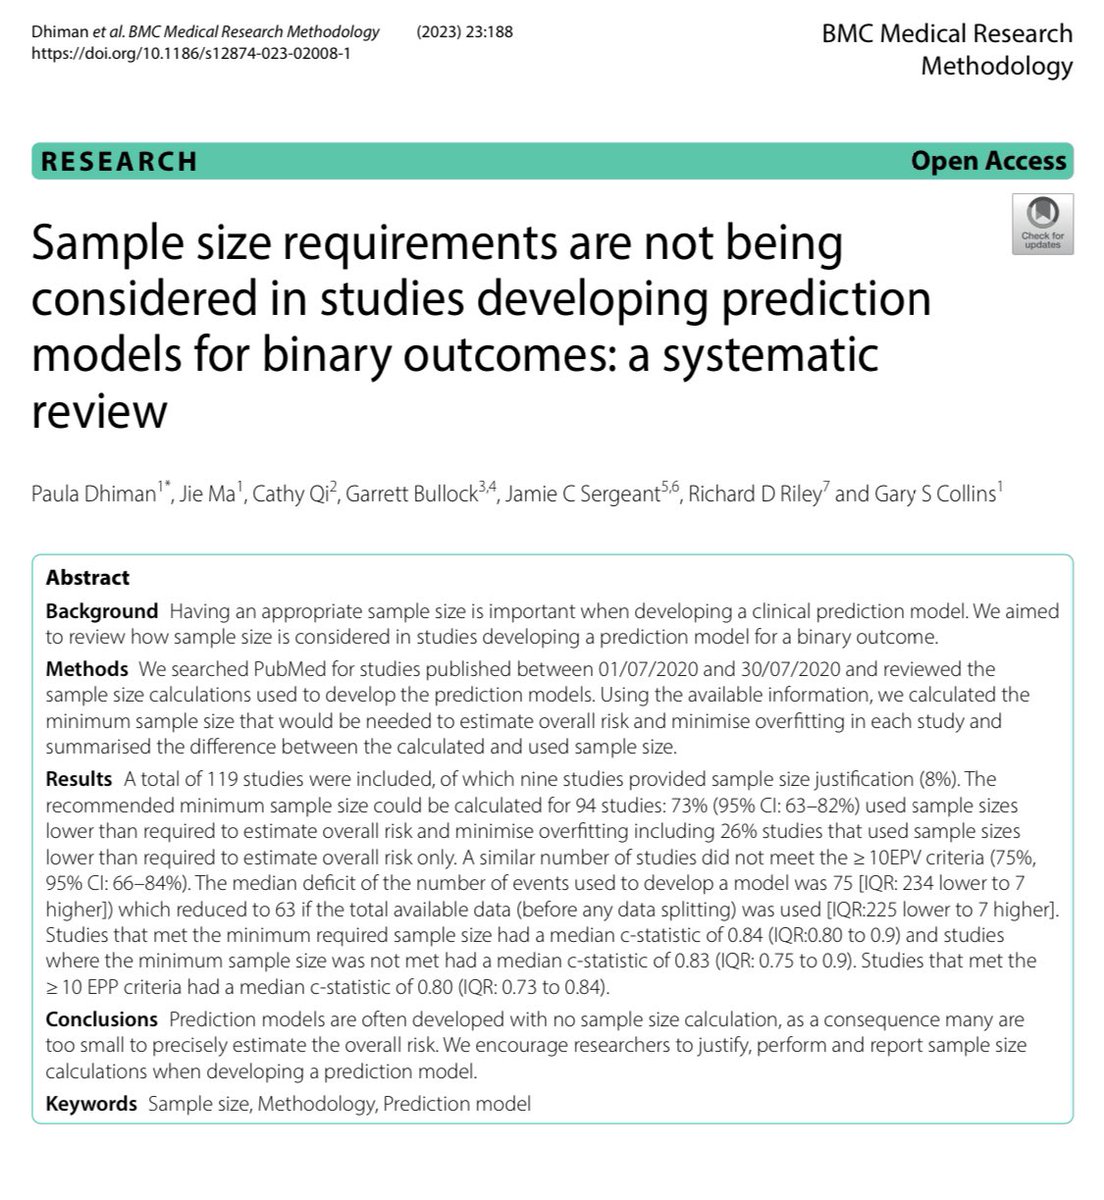 NEW PAPER: Sample size is not being considered when developing a prediction model Only 8% of studies justified their sample size and unsurprisingly 73% didn’t meet their minimum required sample size (using Riley et al formulae) by a median of 75 events tinyurl.com/yc8aw8uk